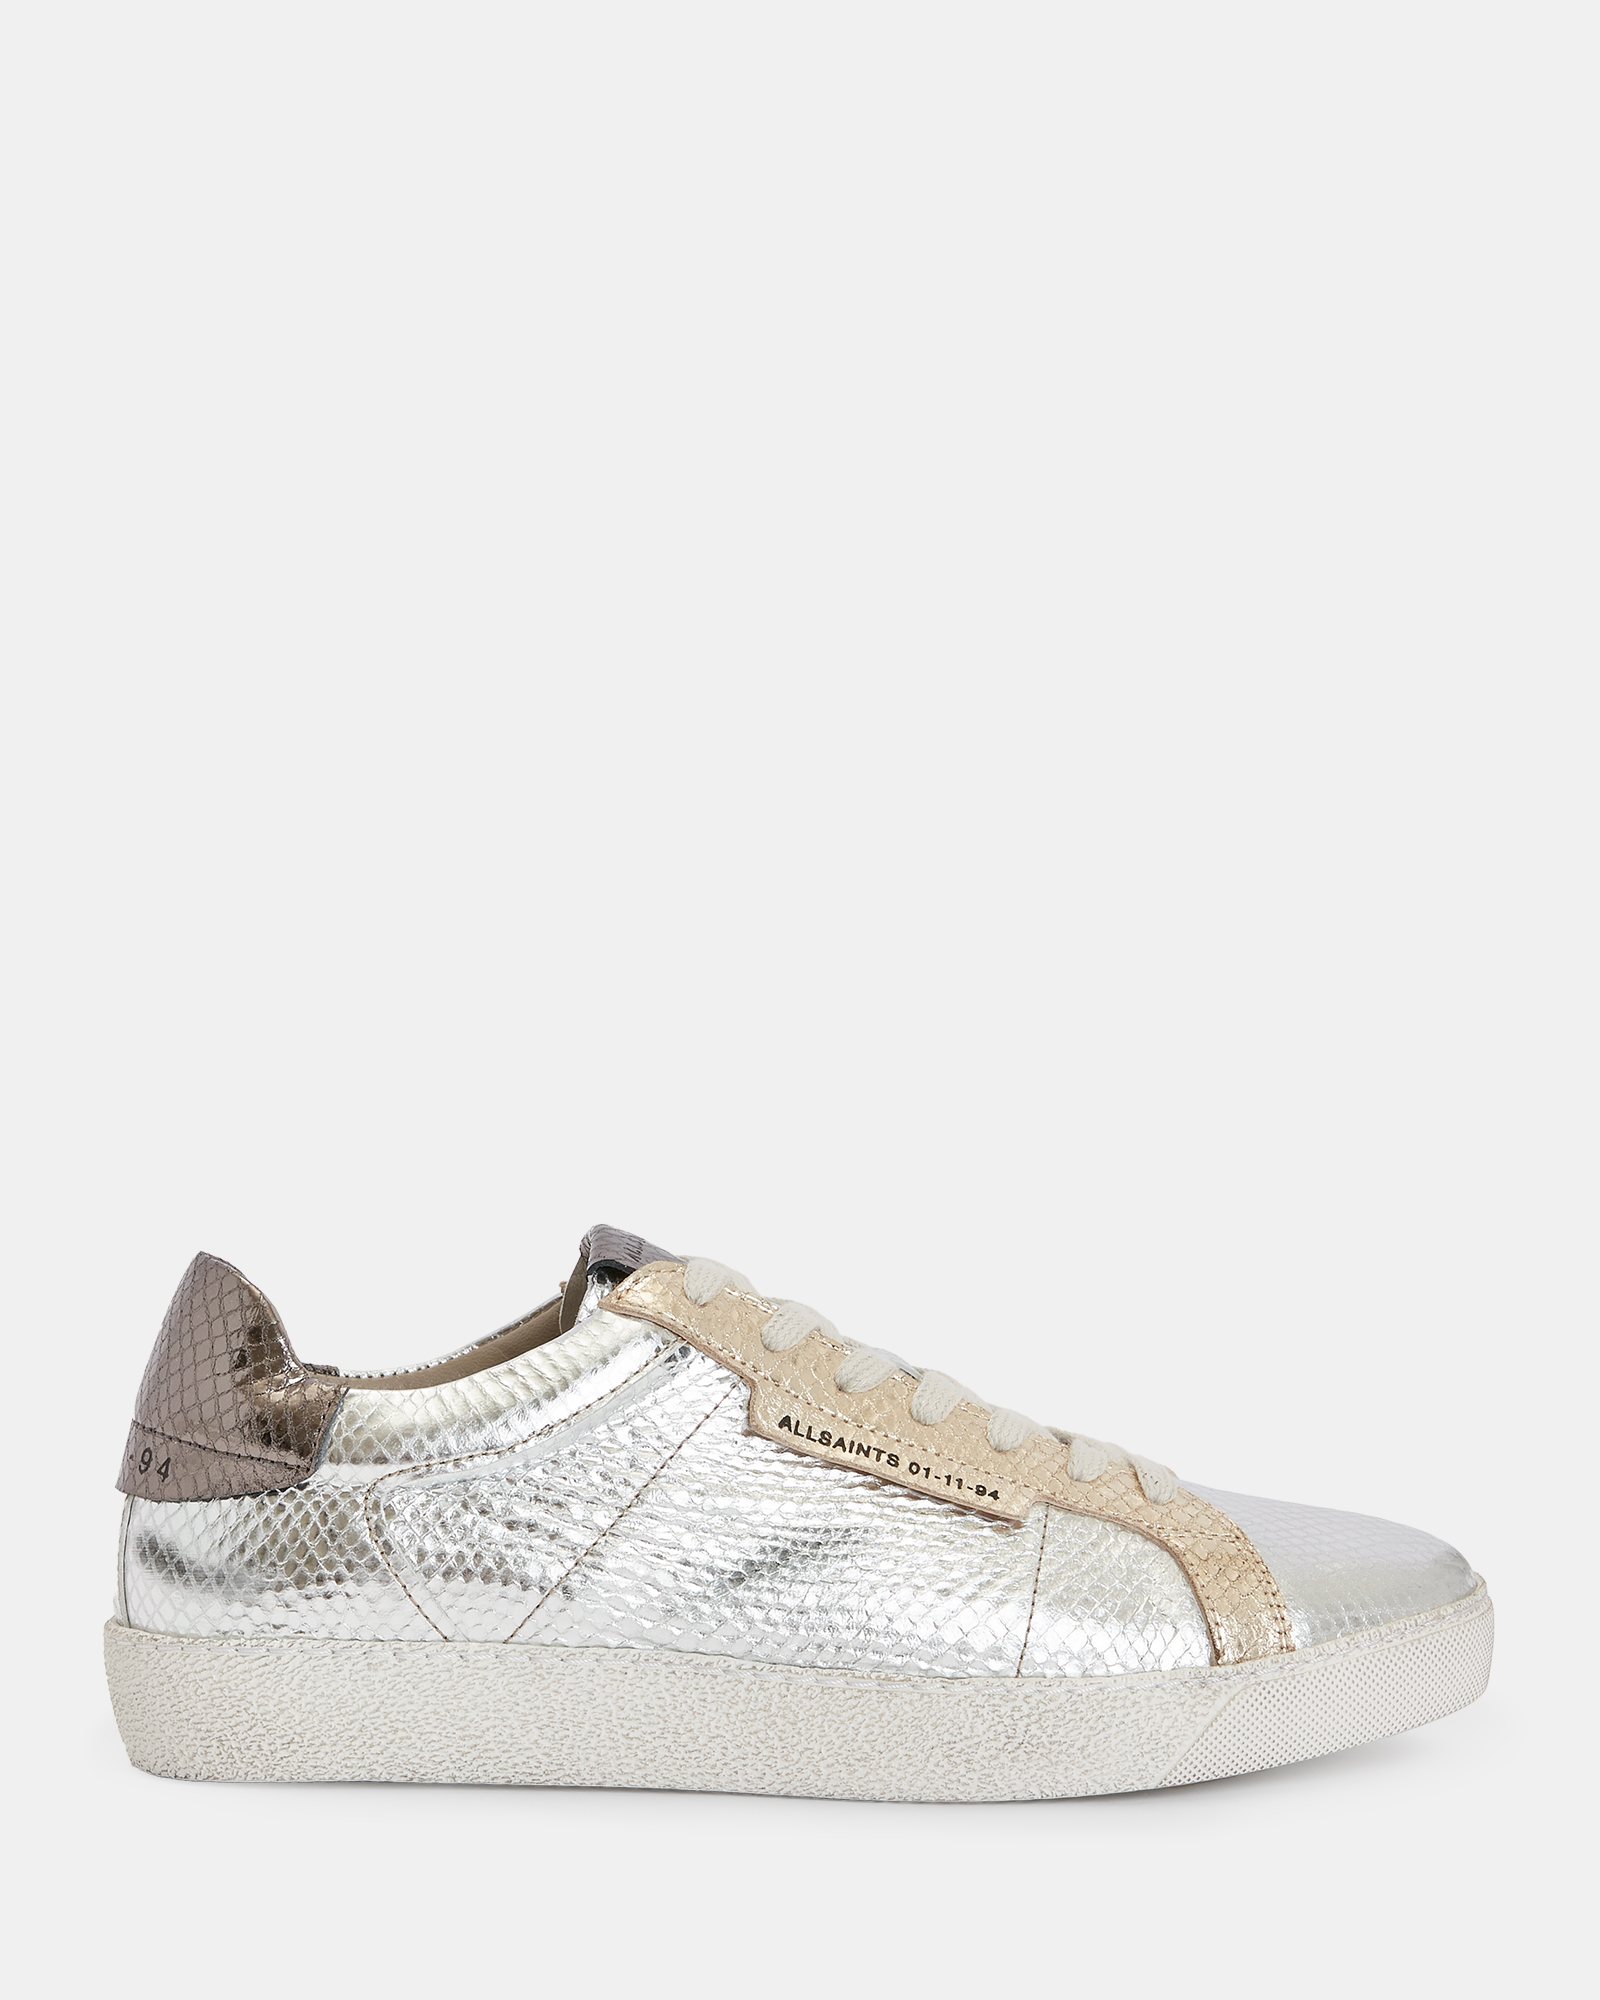 AllSaints Sheer Leather Low Top Trainers,, Silver/Gold